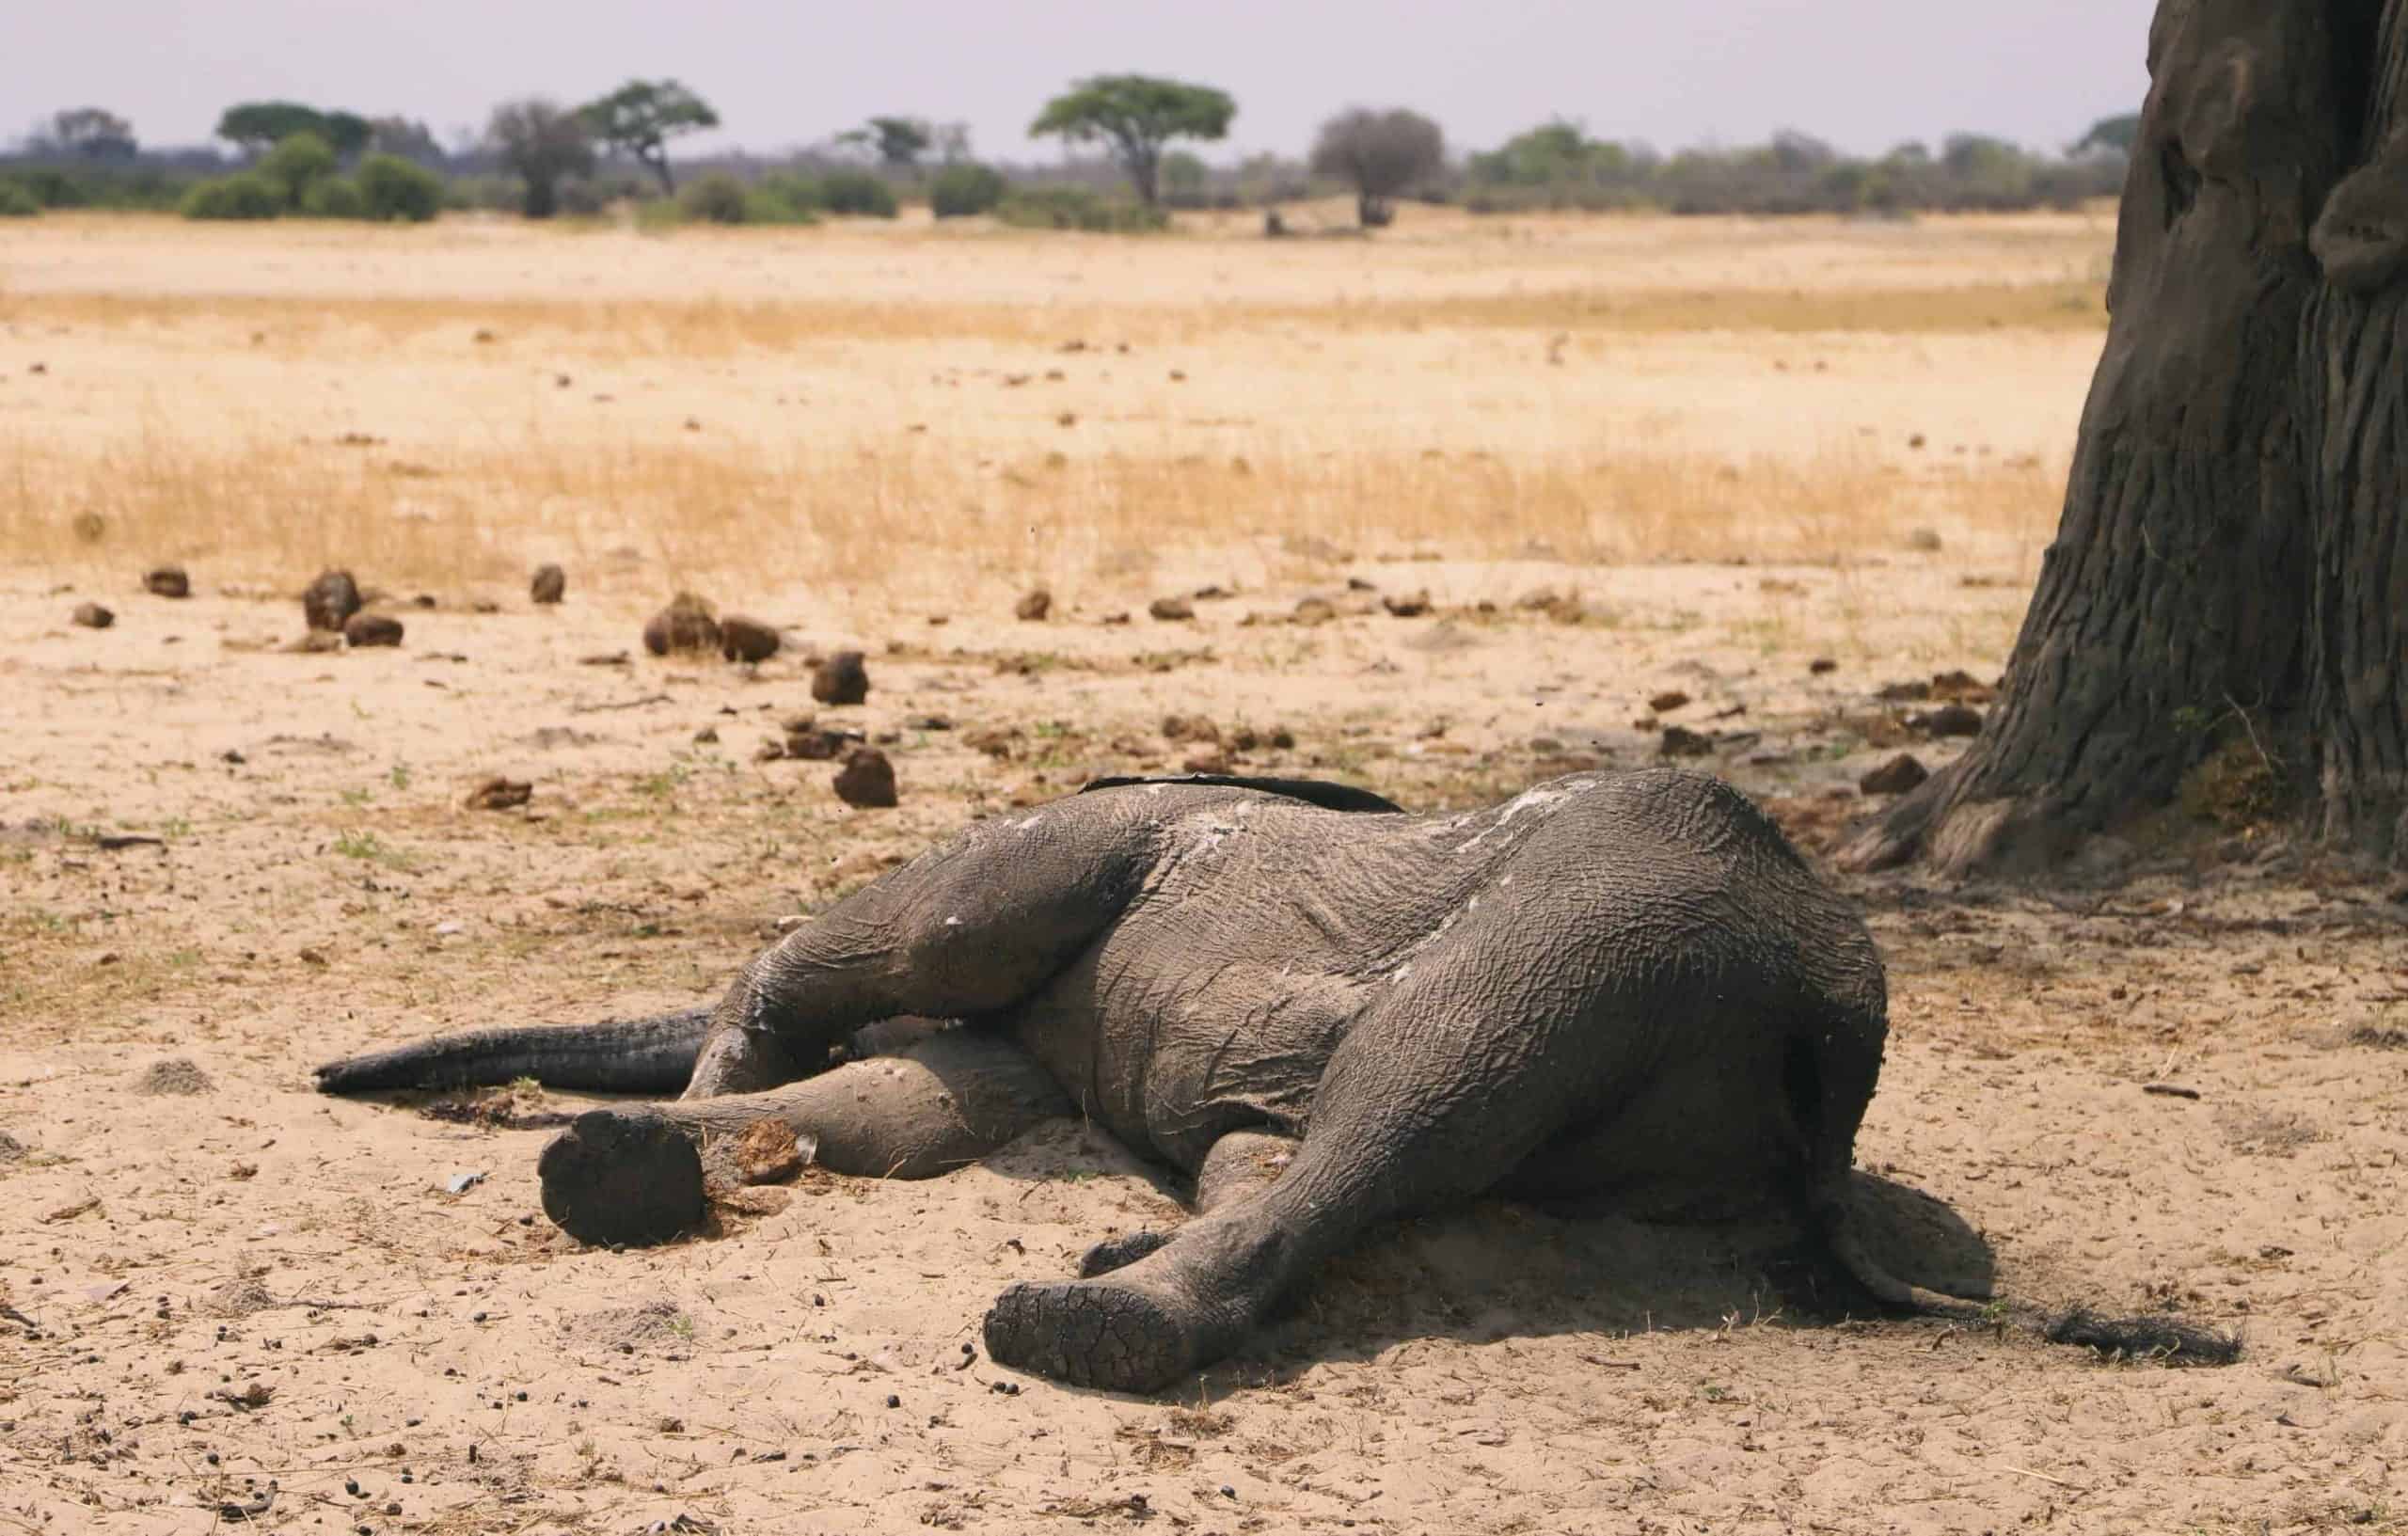 Zimbabwe says 200 elephants have died in drought